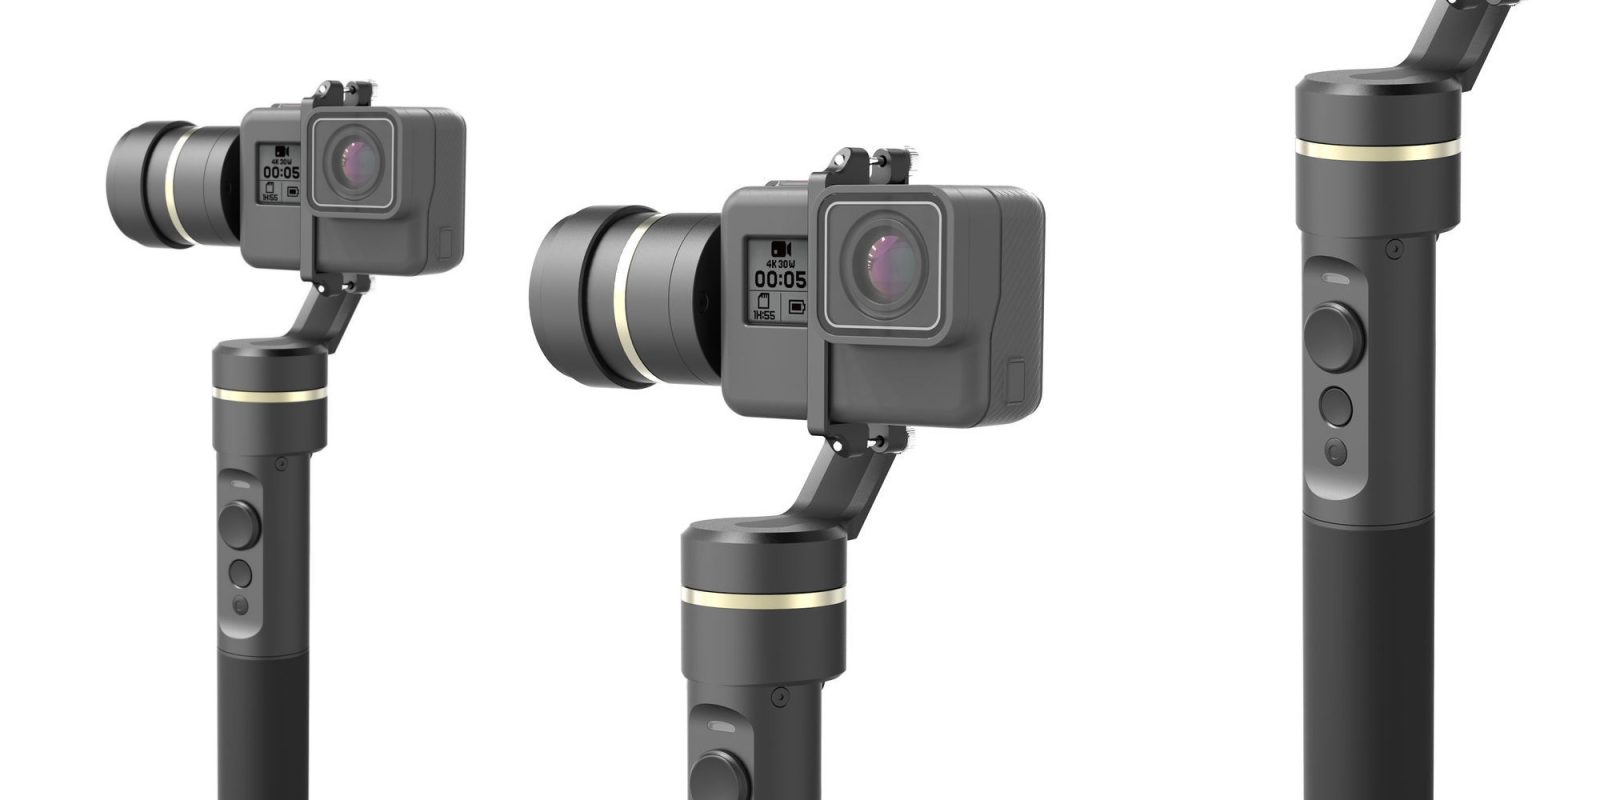 FeiYuTech's GoPro Handheld 3Axis Gimbal is up to $100 off for today